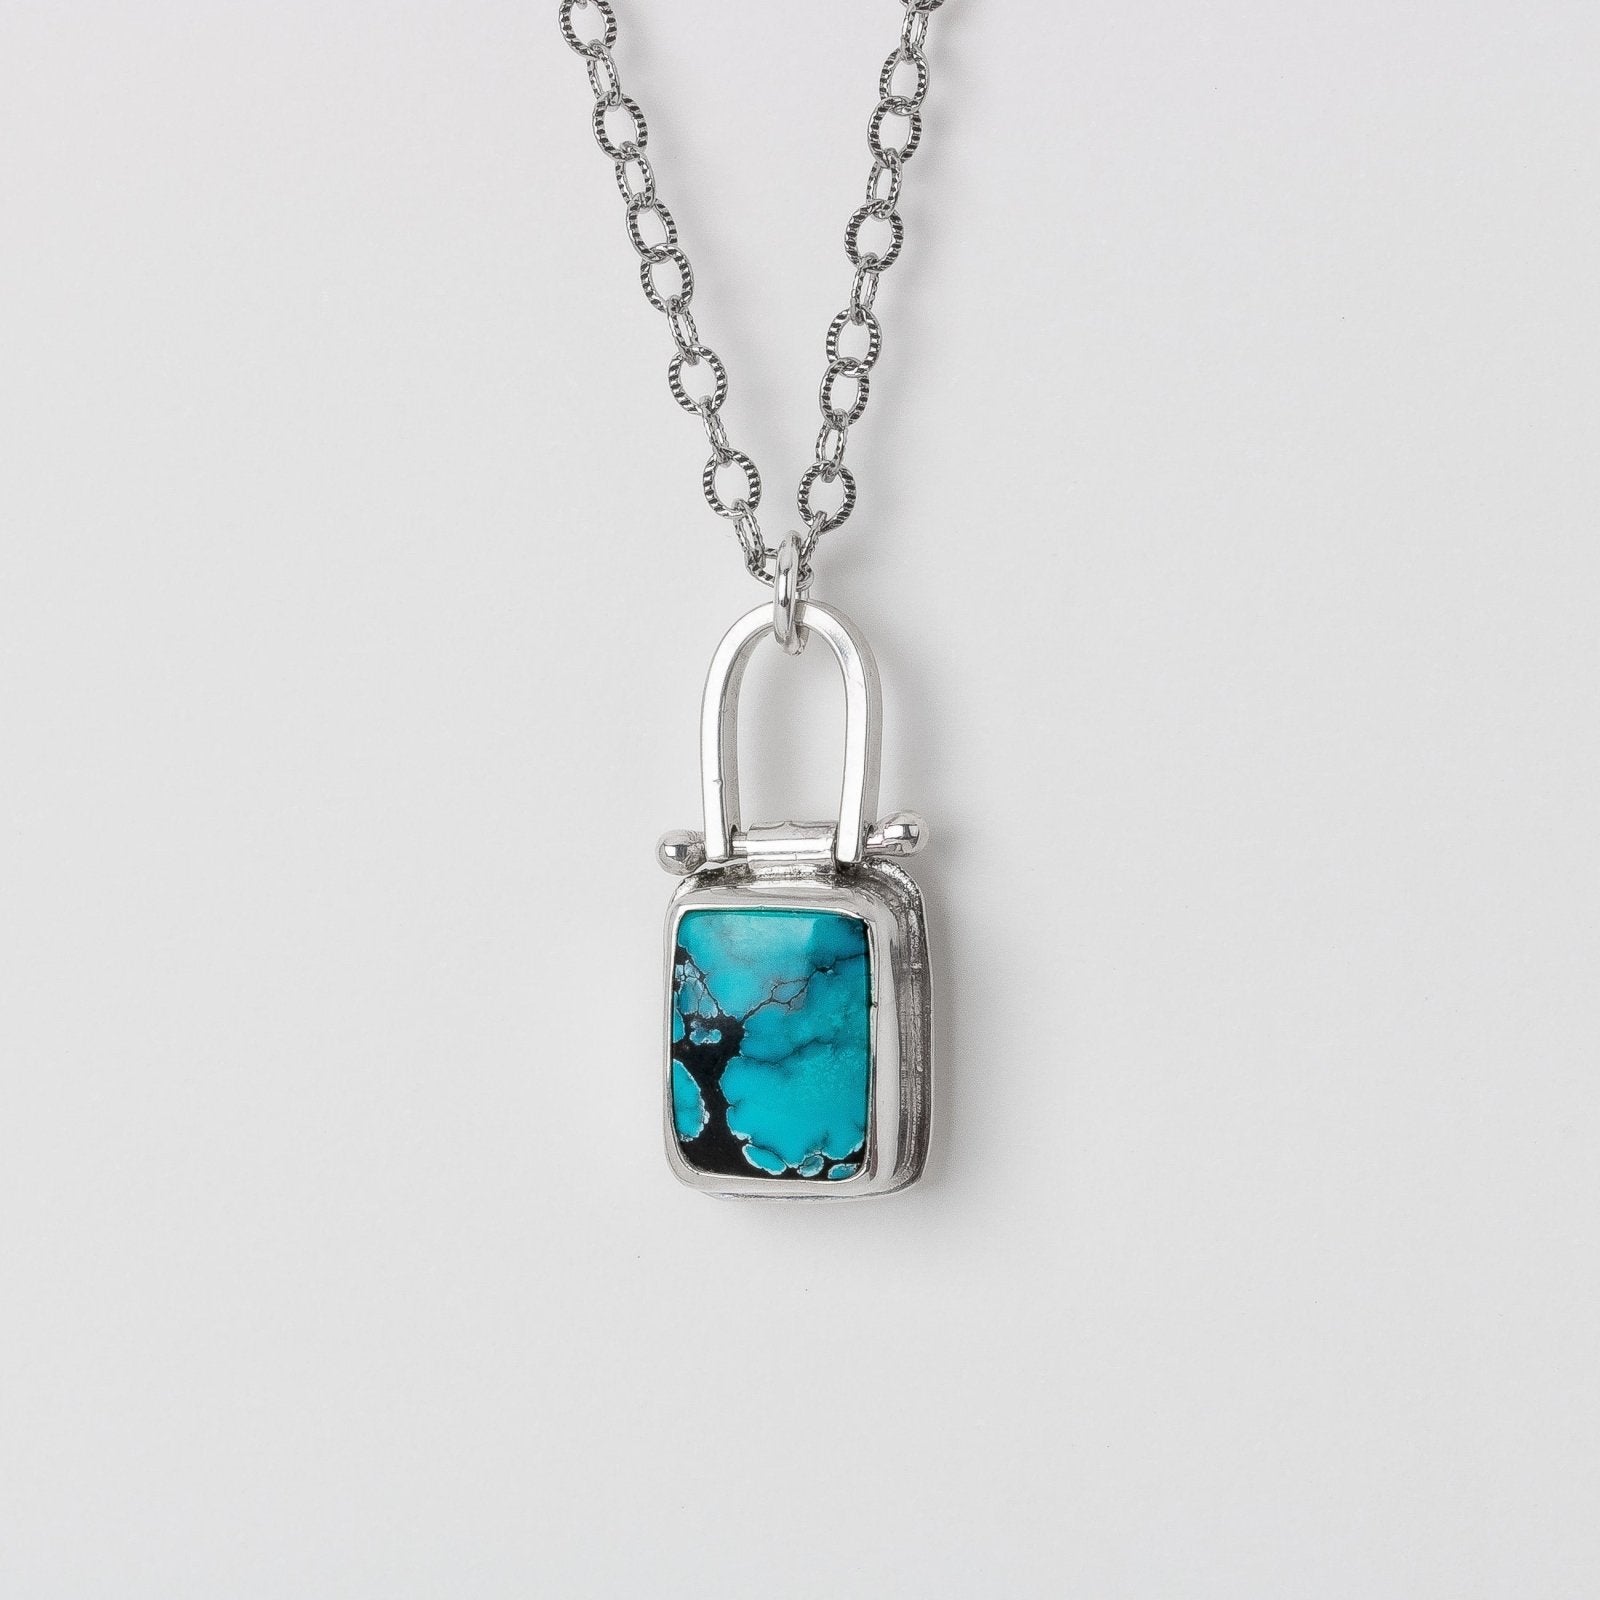 Rectangle Cloud Mountain Turquoise Hinge Necklace - Melanie Golden Jewelry - Fourth of July, gemstone neckklace, gemstone necklace, necklace, necklaces